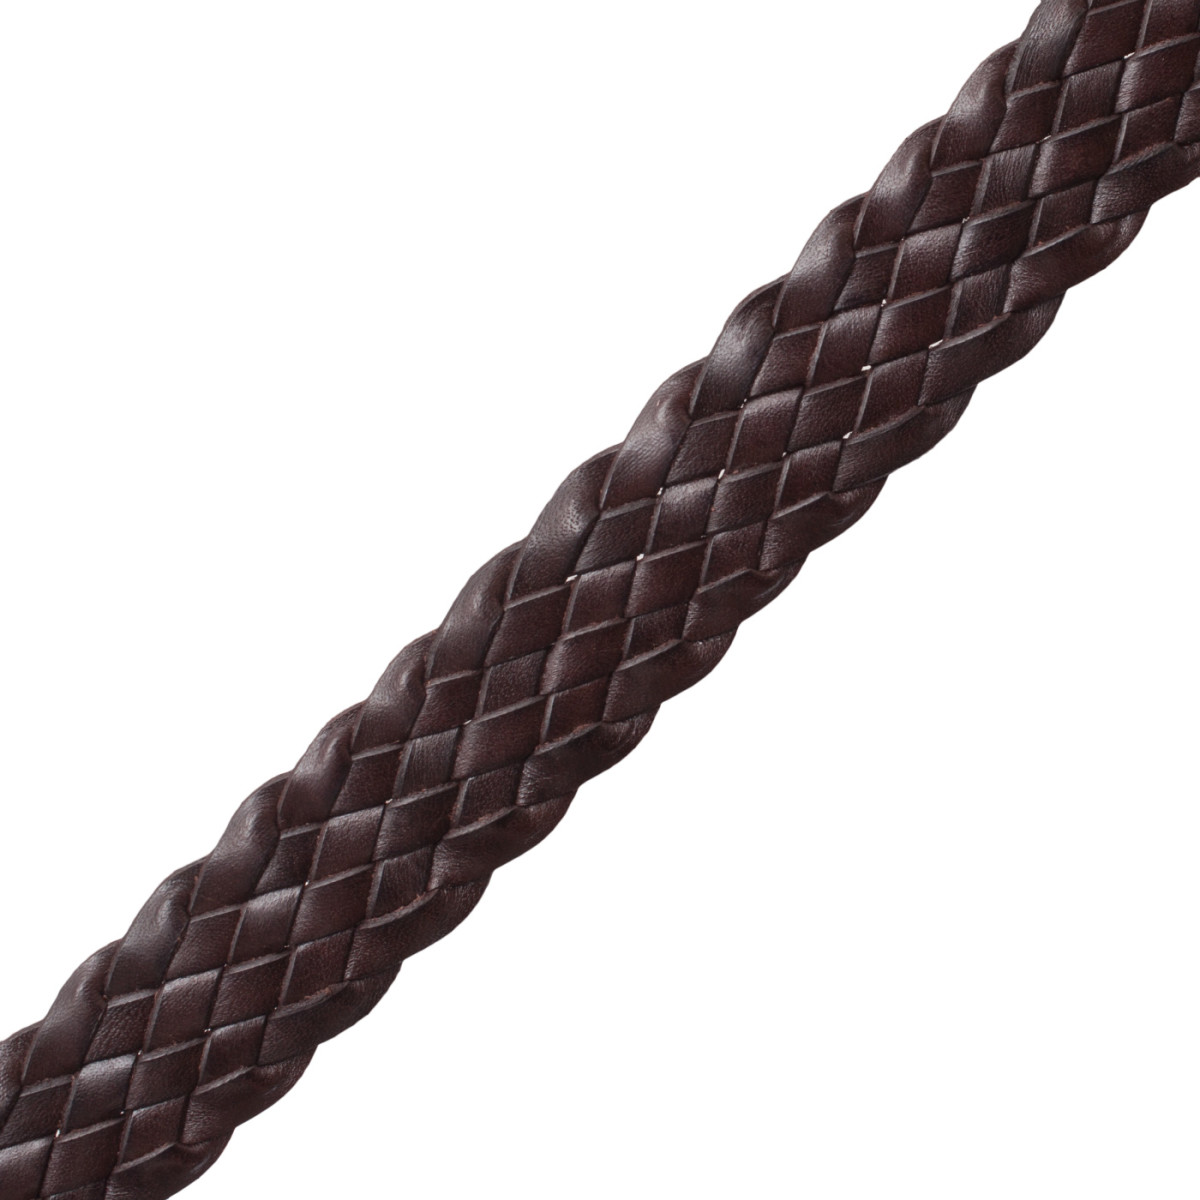 1 WOVEN LEATHER BRAID - ESPRESSO - Samuel and Sons